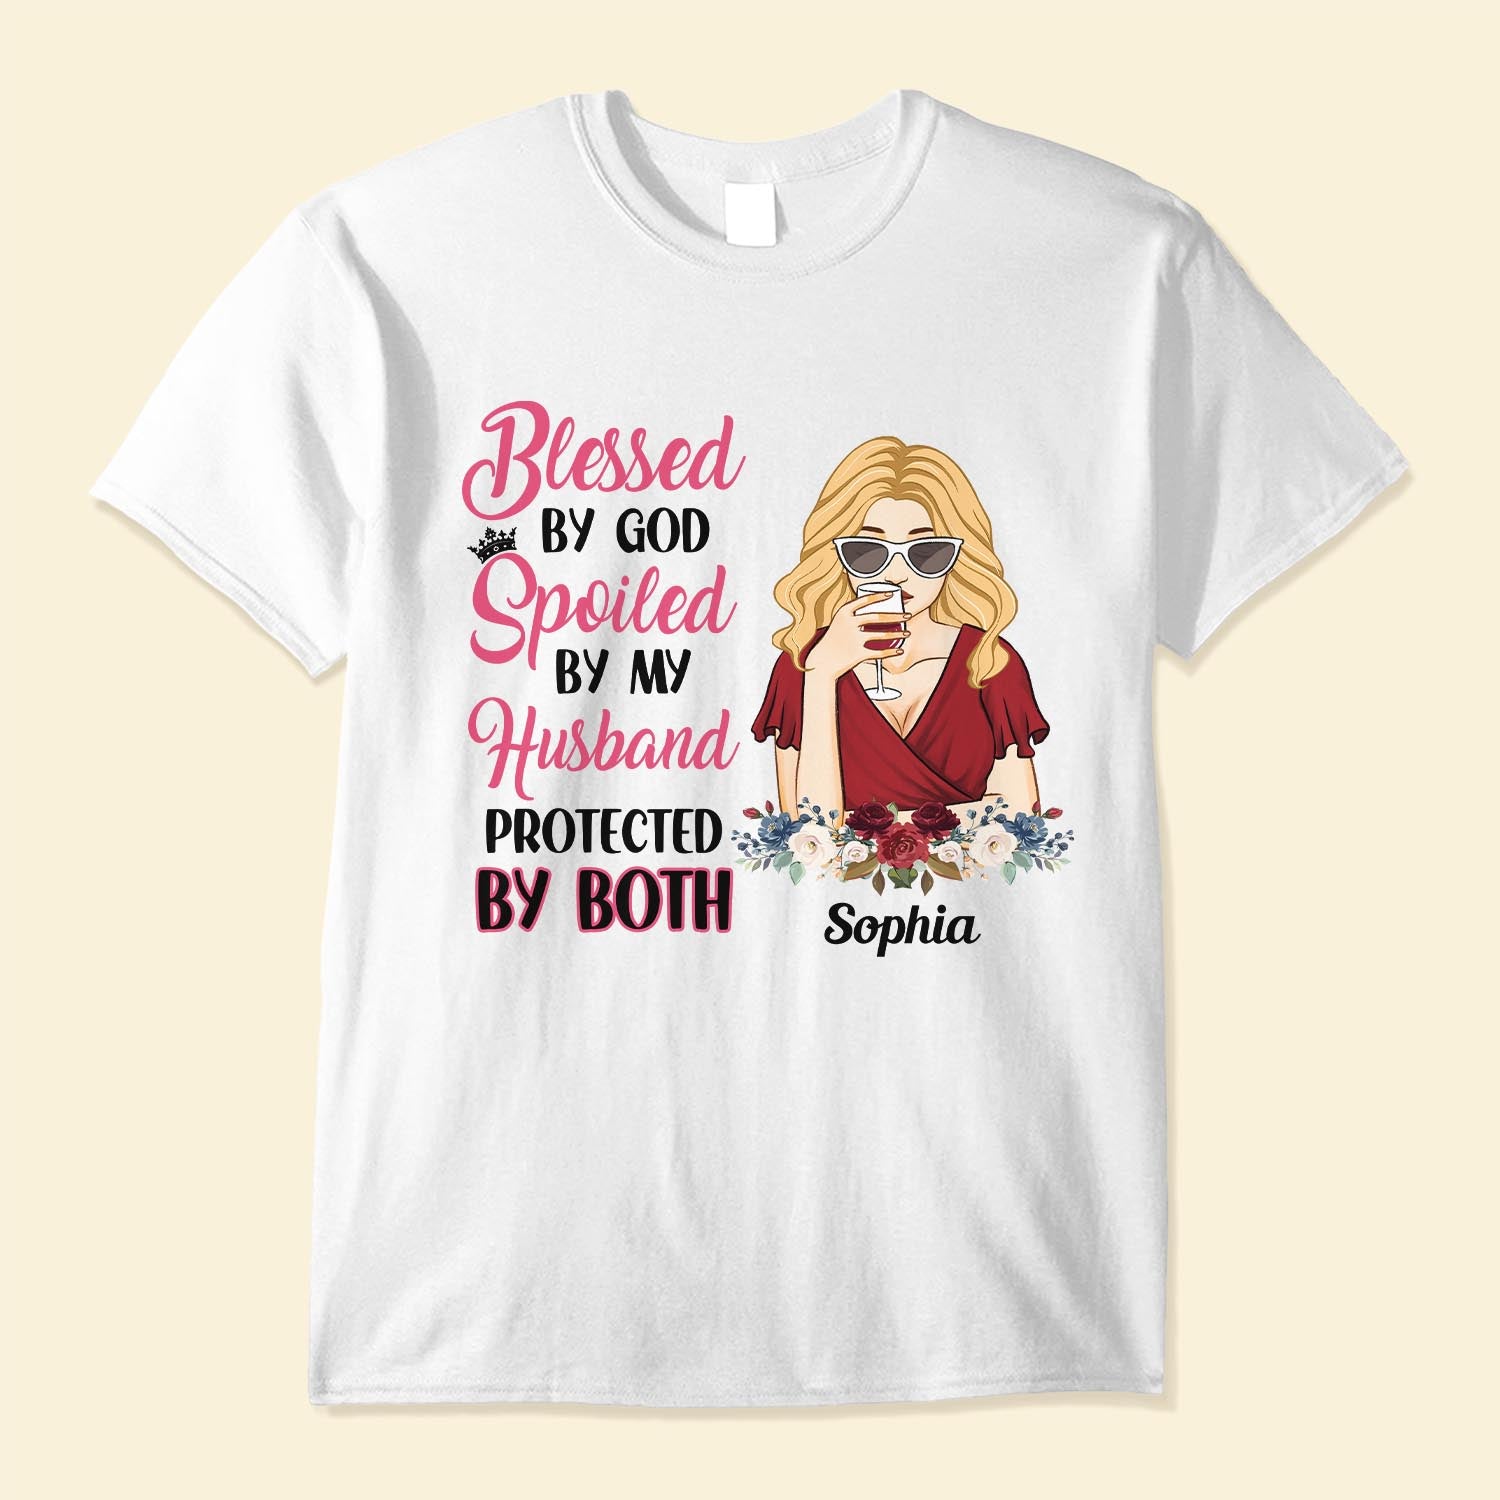 Blessed By God , Spoiled By My Husband - Personalized Shirt - Anniversary, Valentine's Day Gift For Wife